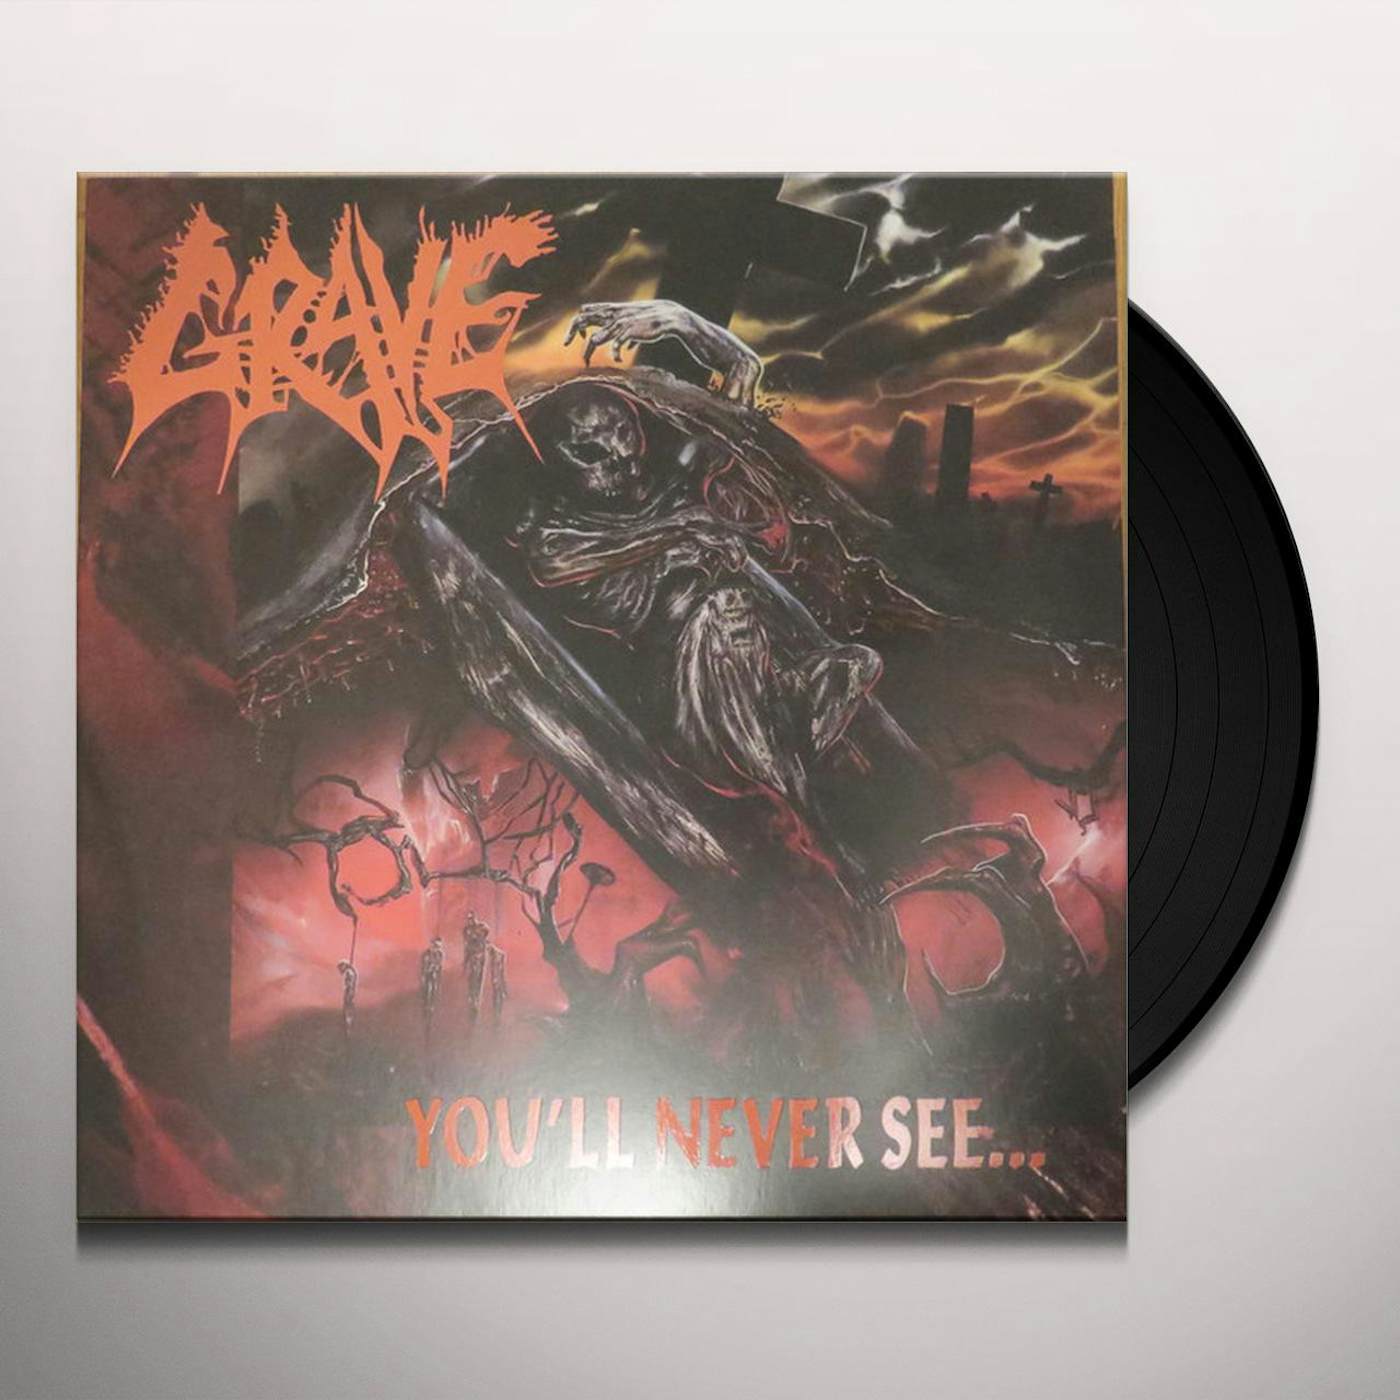 Grave YOU'LL NEVER SEE Vinyl Record